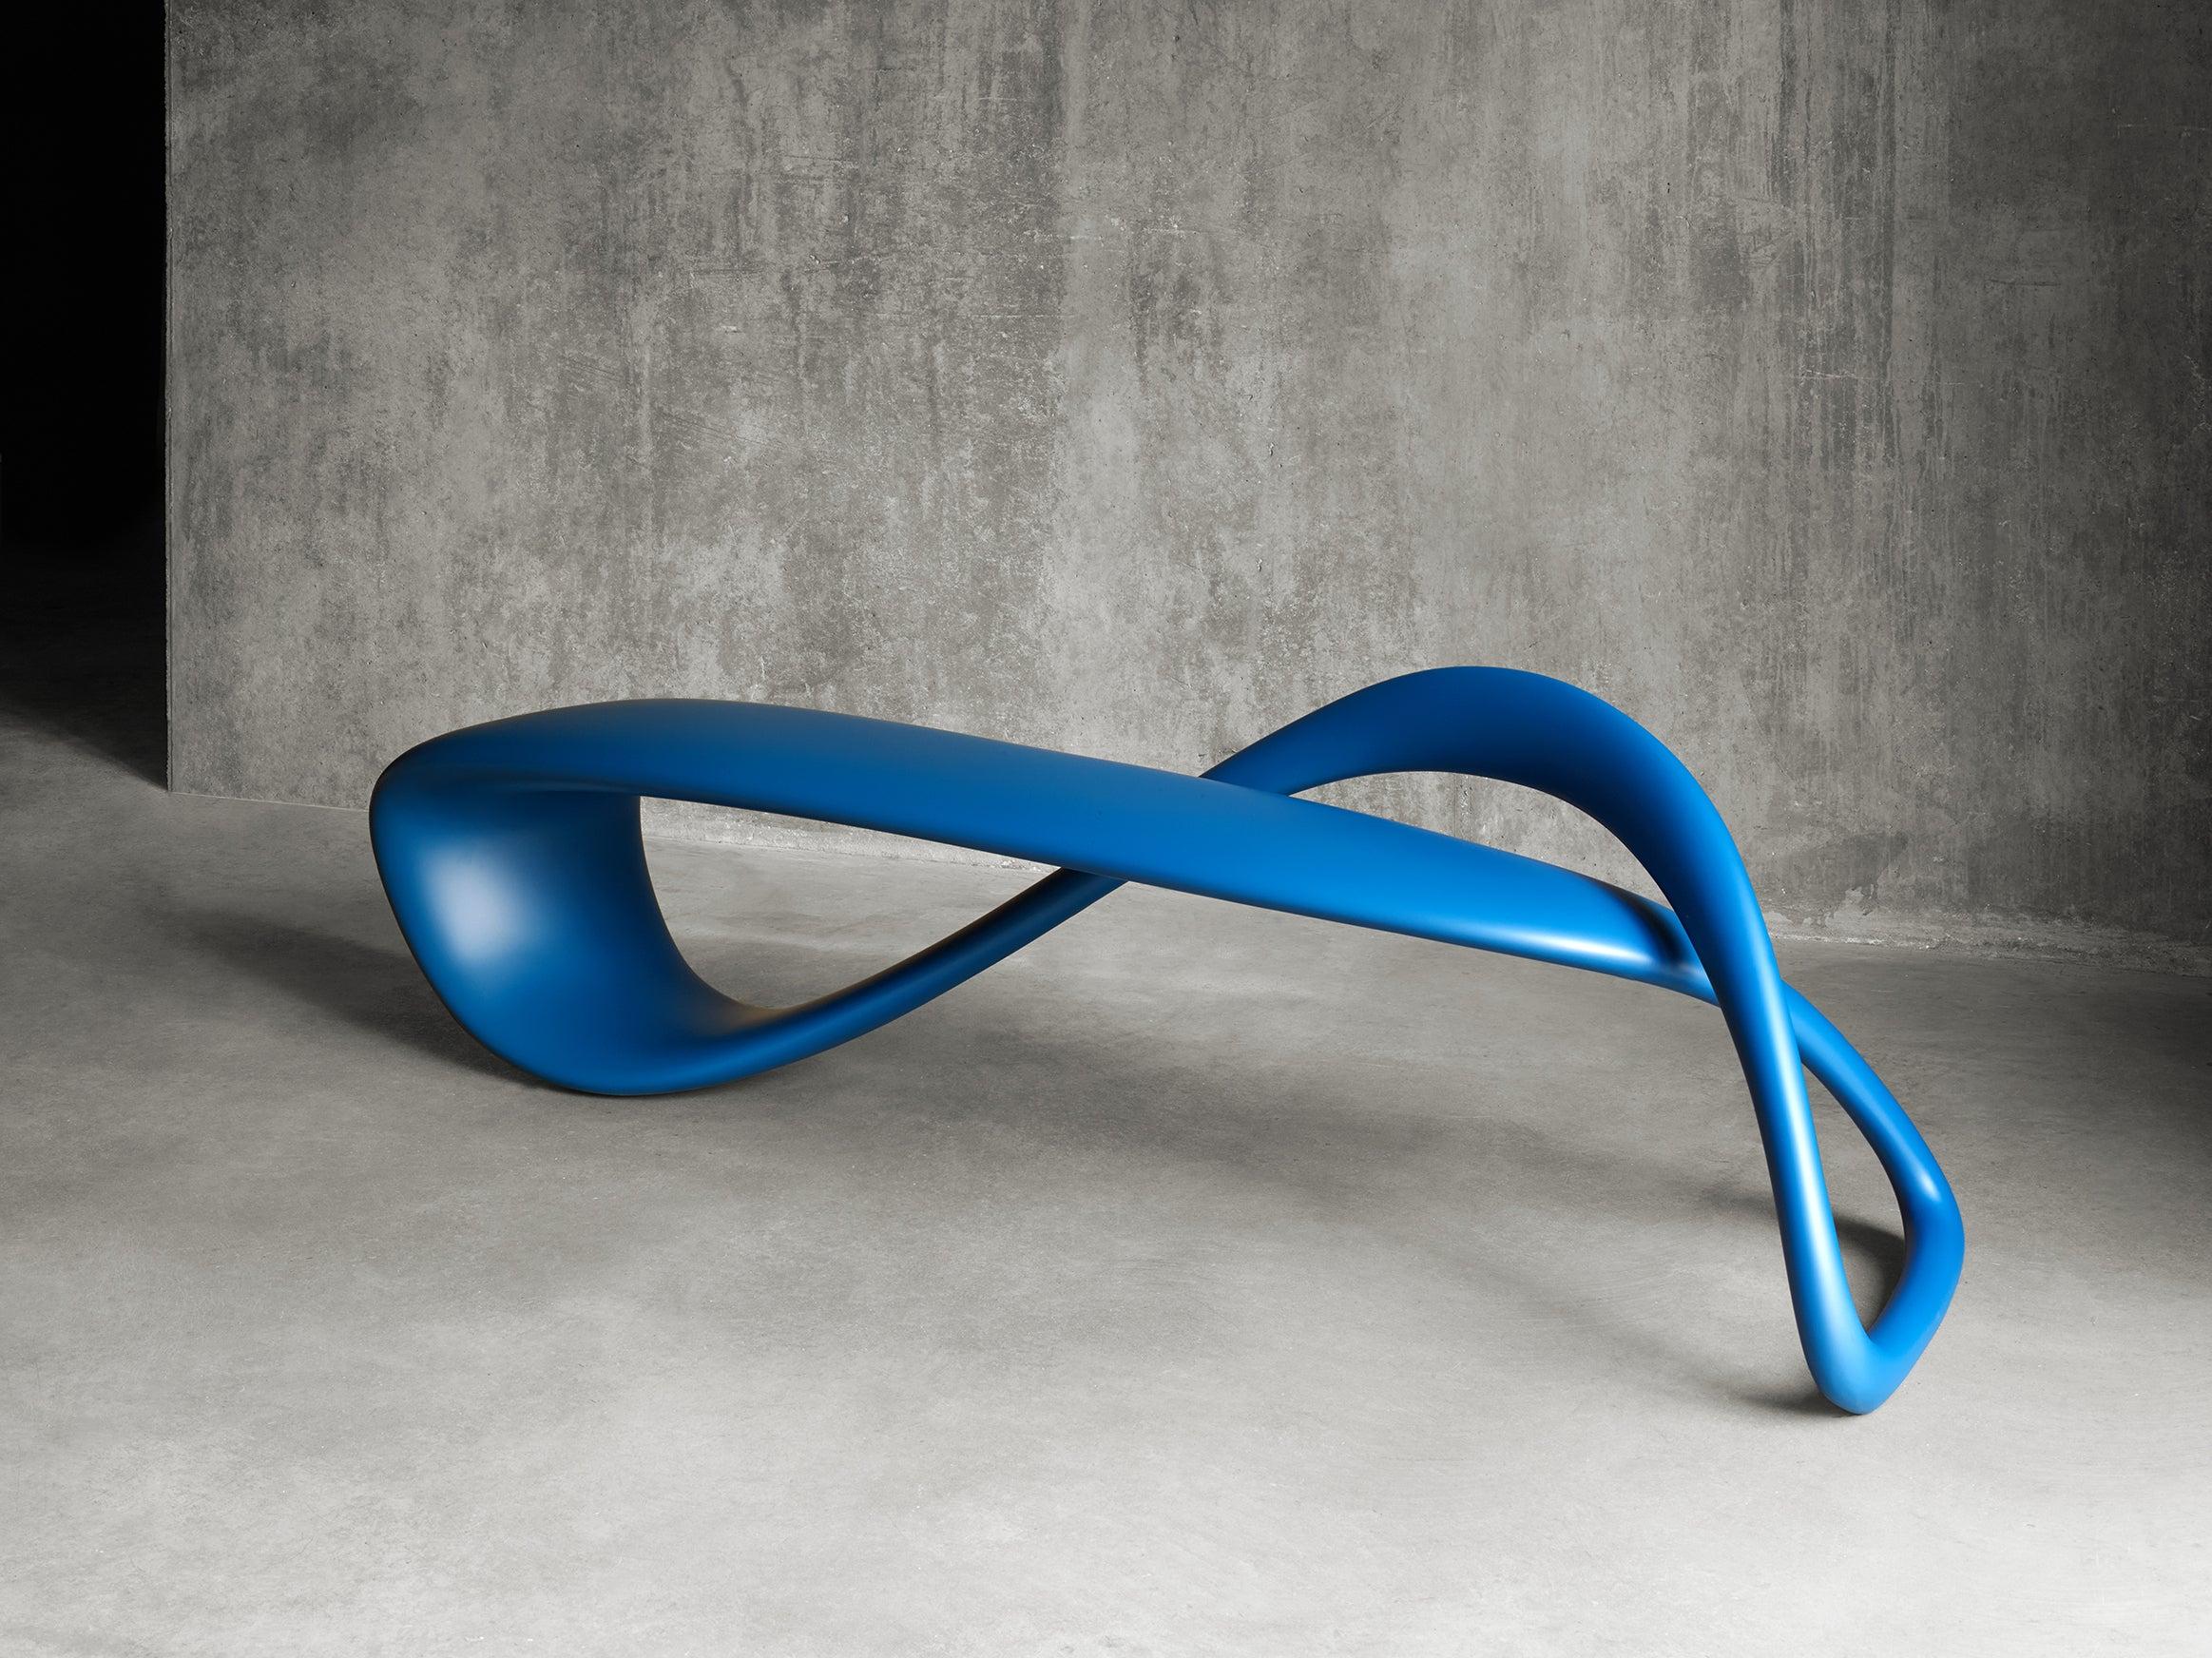 The result of exploring the possibilities of a singular line in 3D space, the E-Turn is a continuously morphing ribbon that twists and turns from seat to structure before overlapping and returning again in the configuration of a bench. The endless